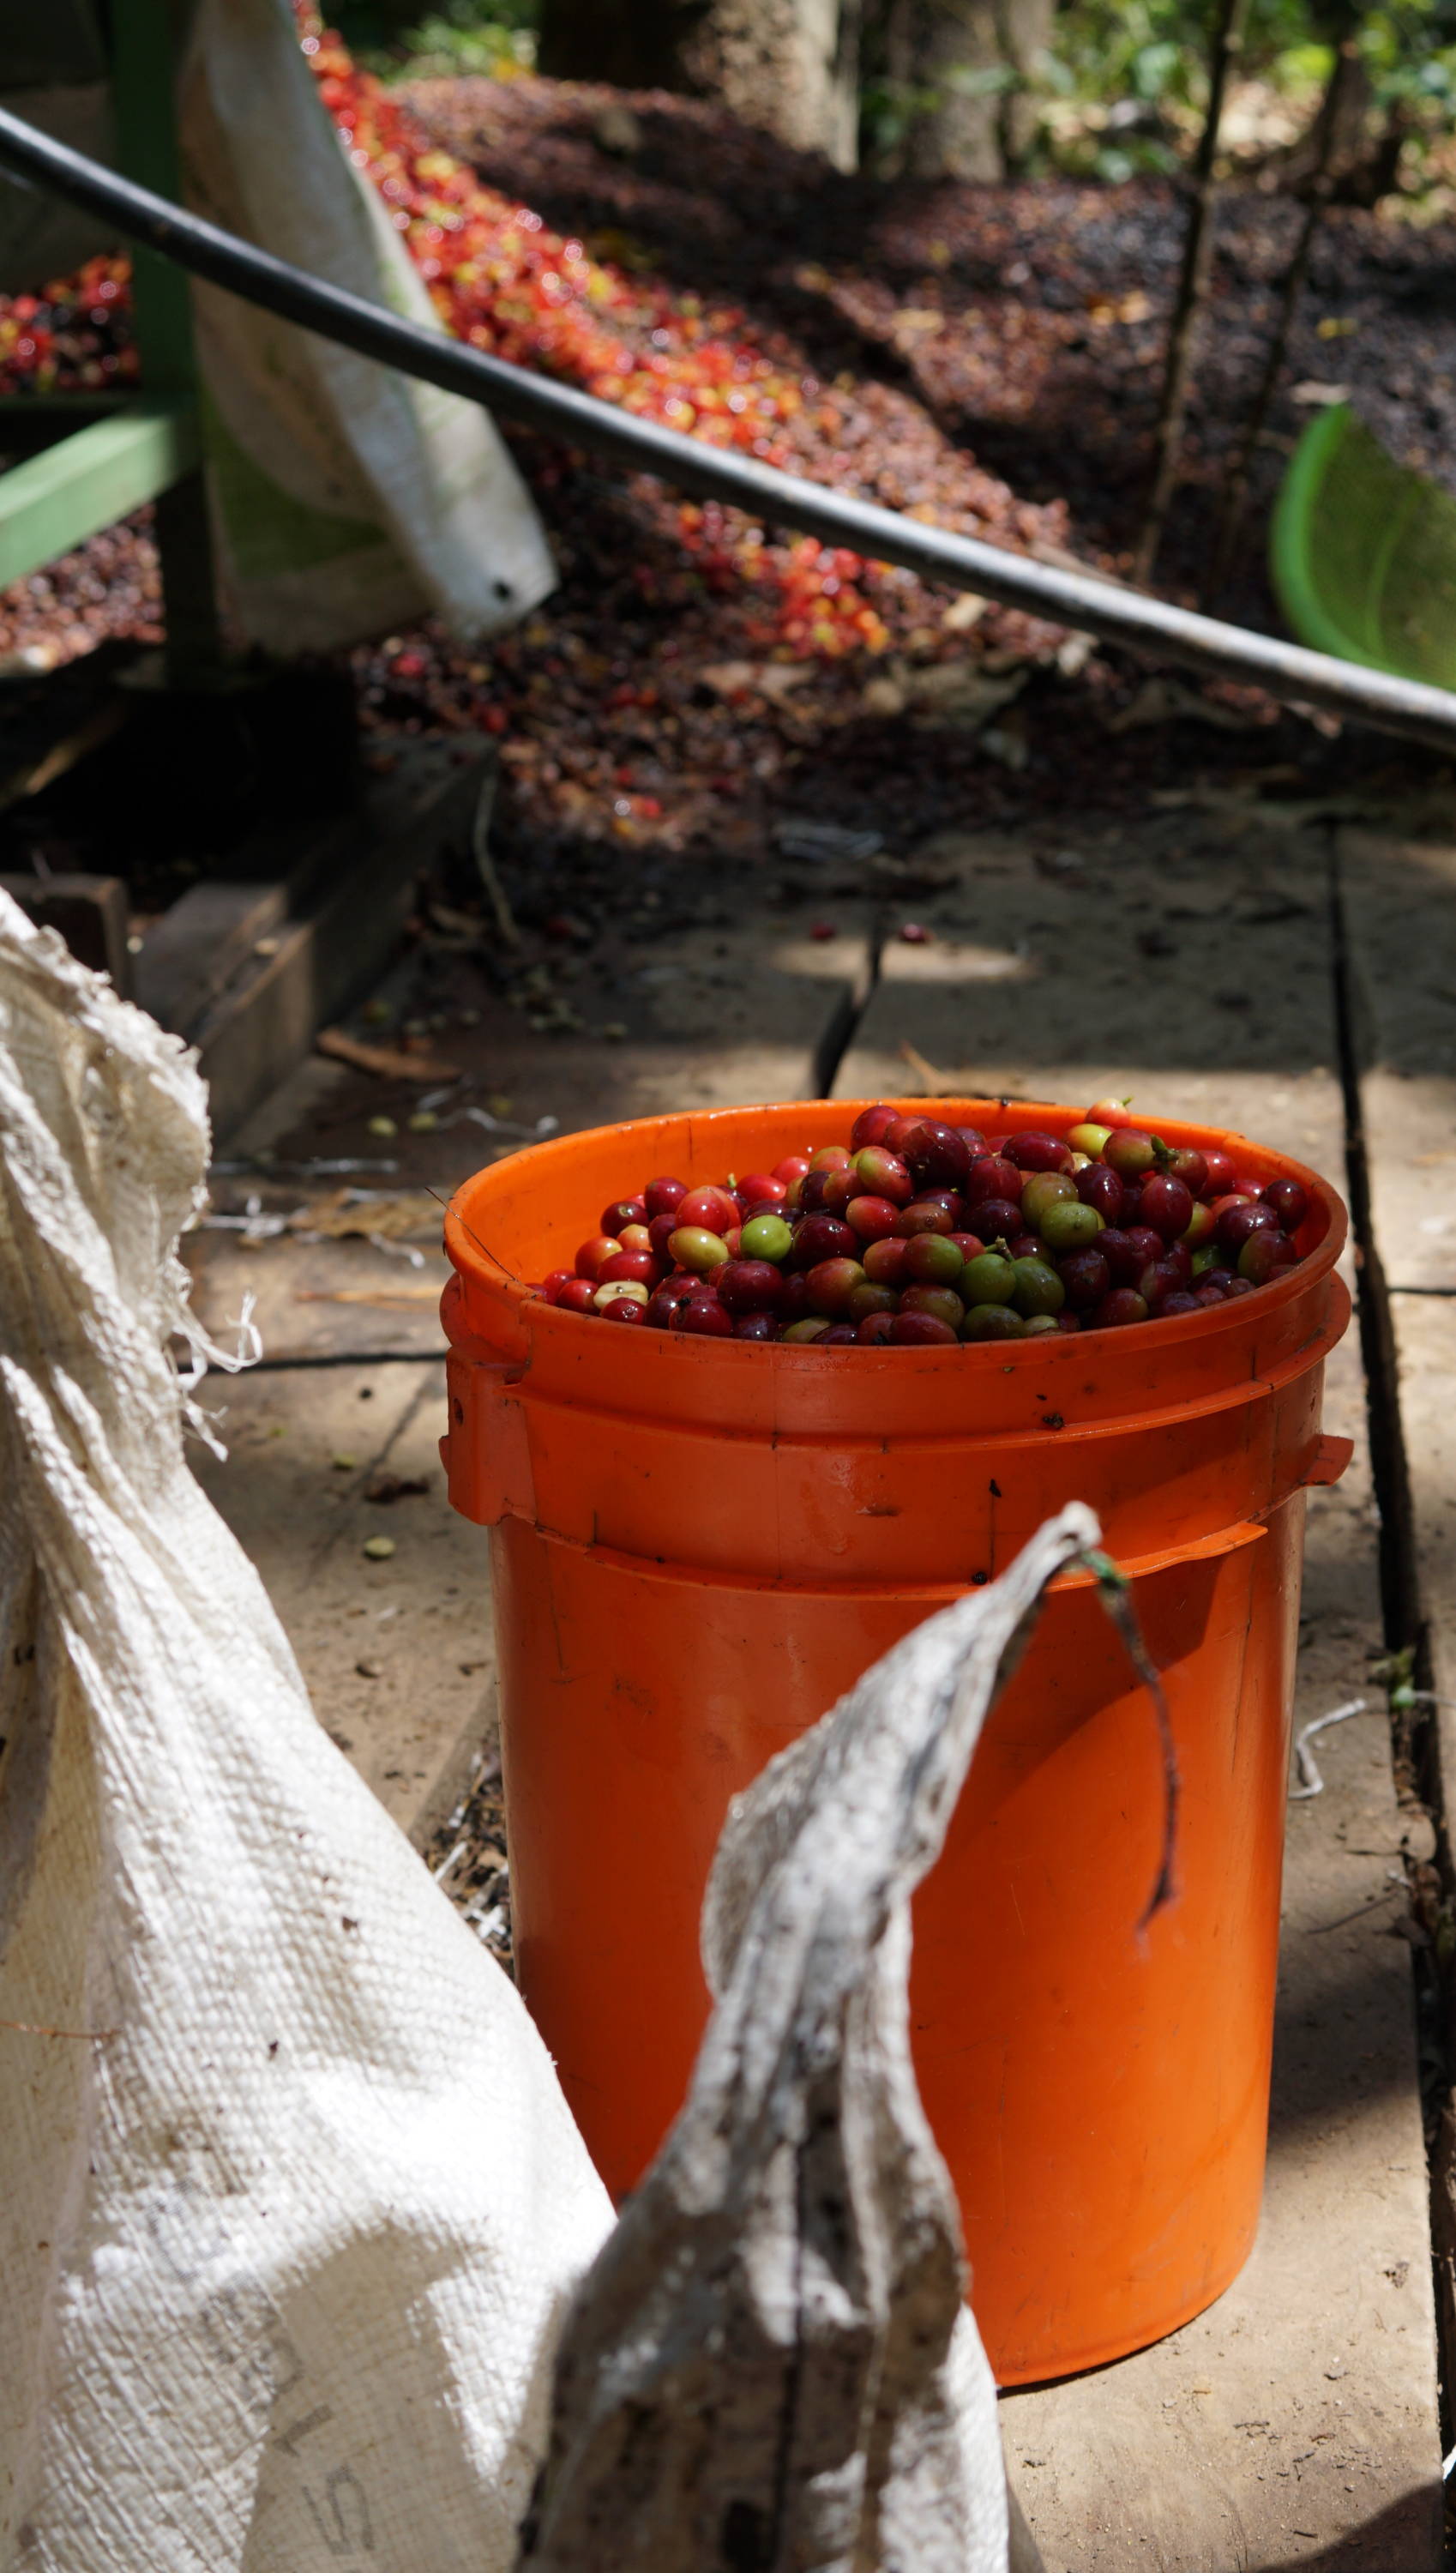 Coffee Cherries ready for processing at the eco-mill in Tierra y Libertad. You can see the pulp in the background, that is removed from the coffee cherry by the eco-mill. The coffee pulp will be used as fertiliser for the mature coffee plants after the harvest is finished.  